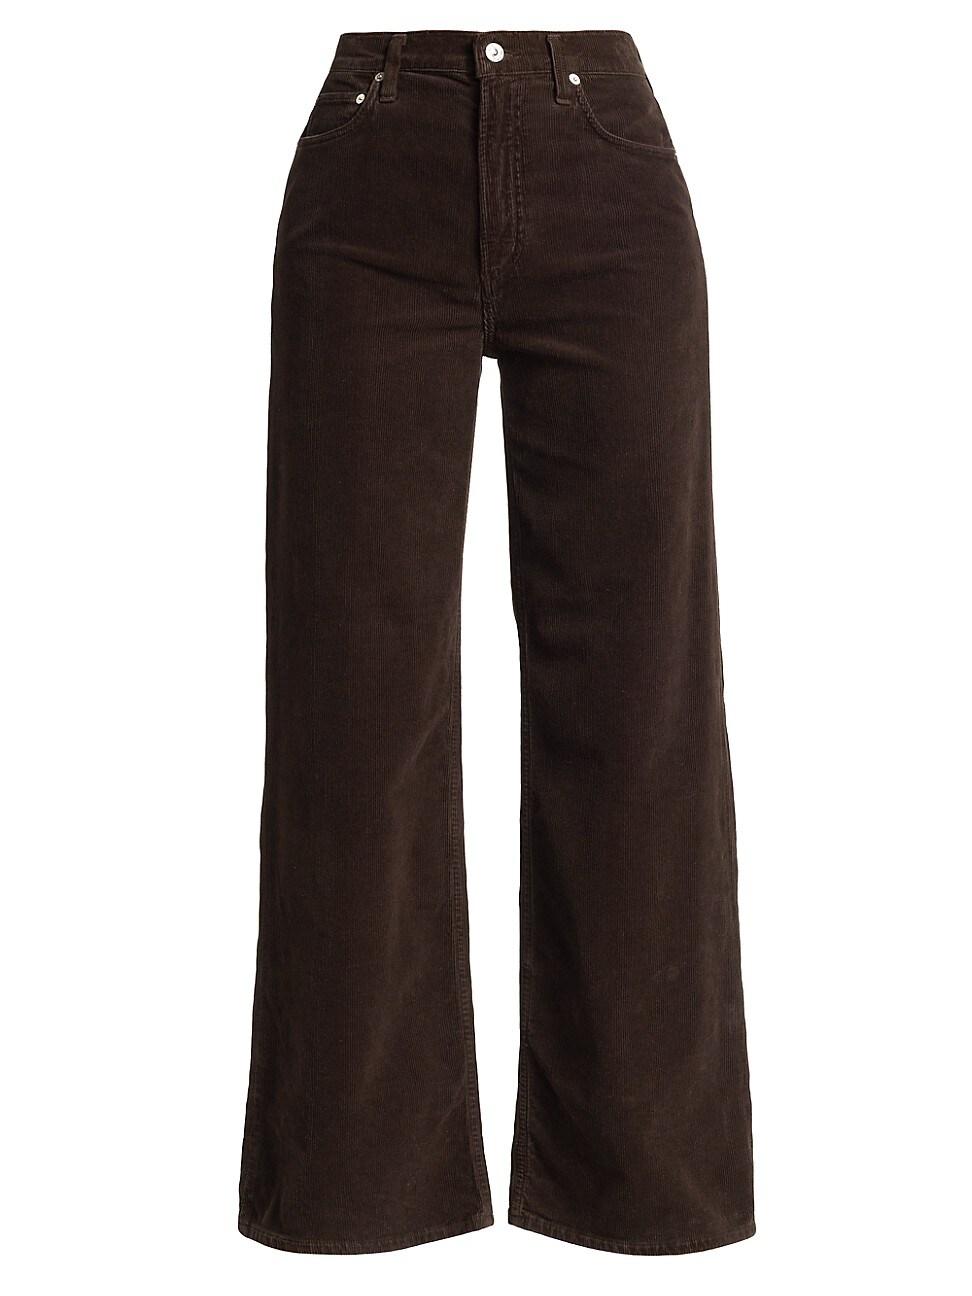 Citizens of Humanity Paloma Corduroy Baggy Jeans in Black | Lyst